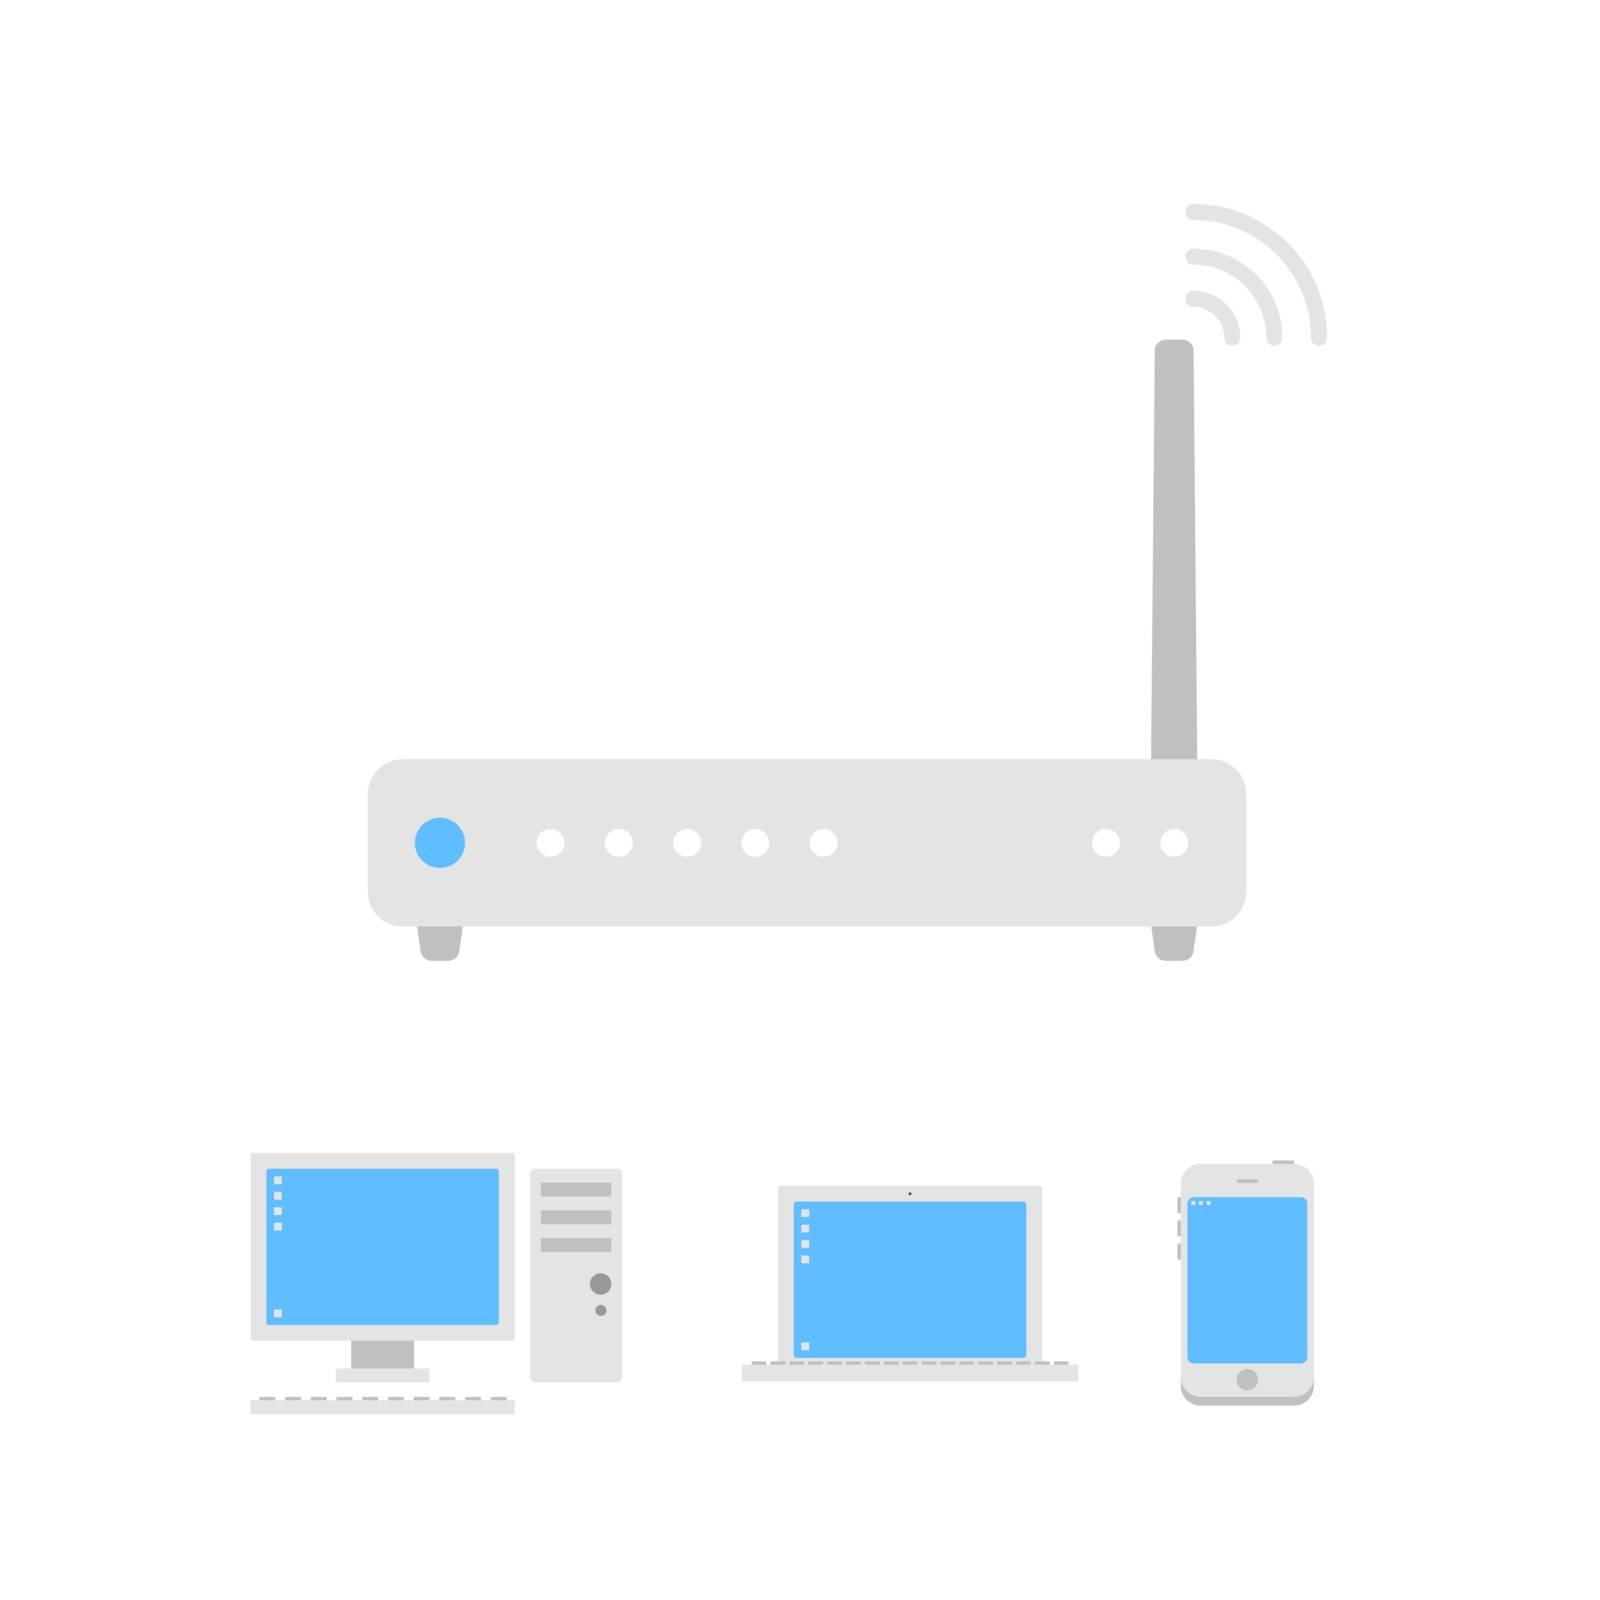 Wi-fi router icon connected with pc, notebook and smartphone